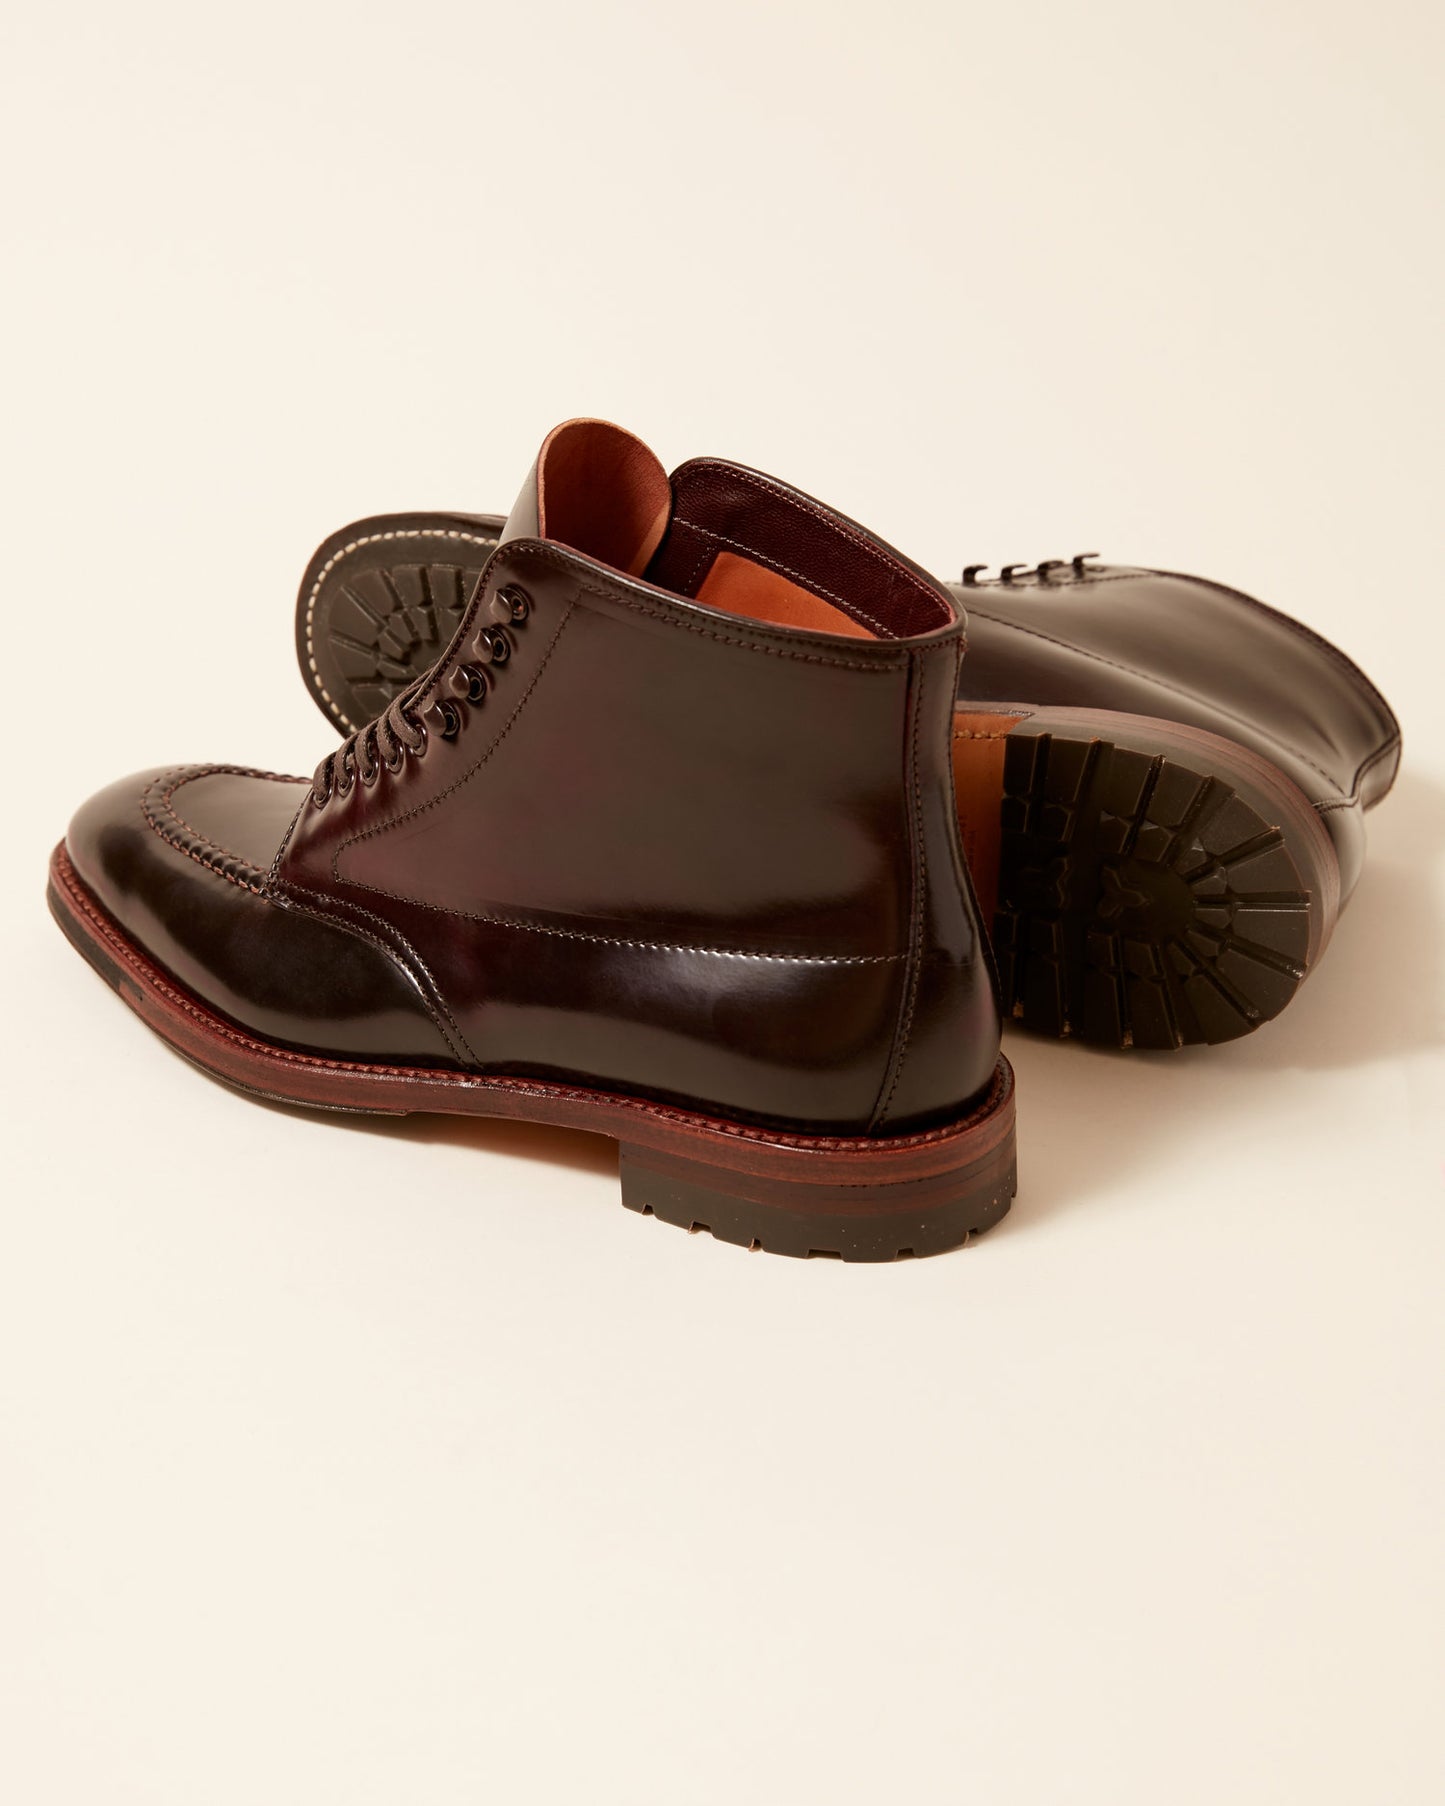 "Post Alley" Handsewn Indy Boot in Color 8 Shell Cordovan, Plaza Last